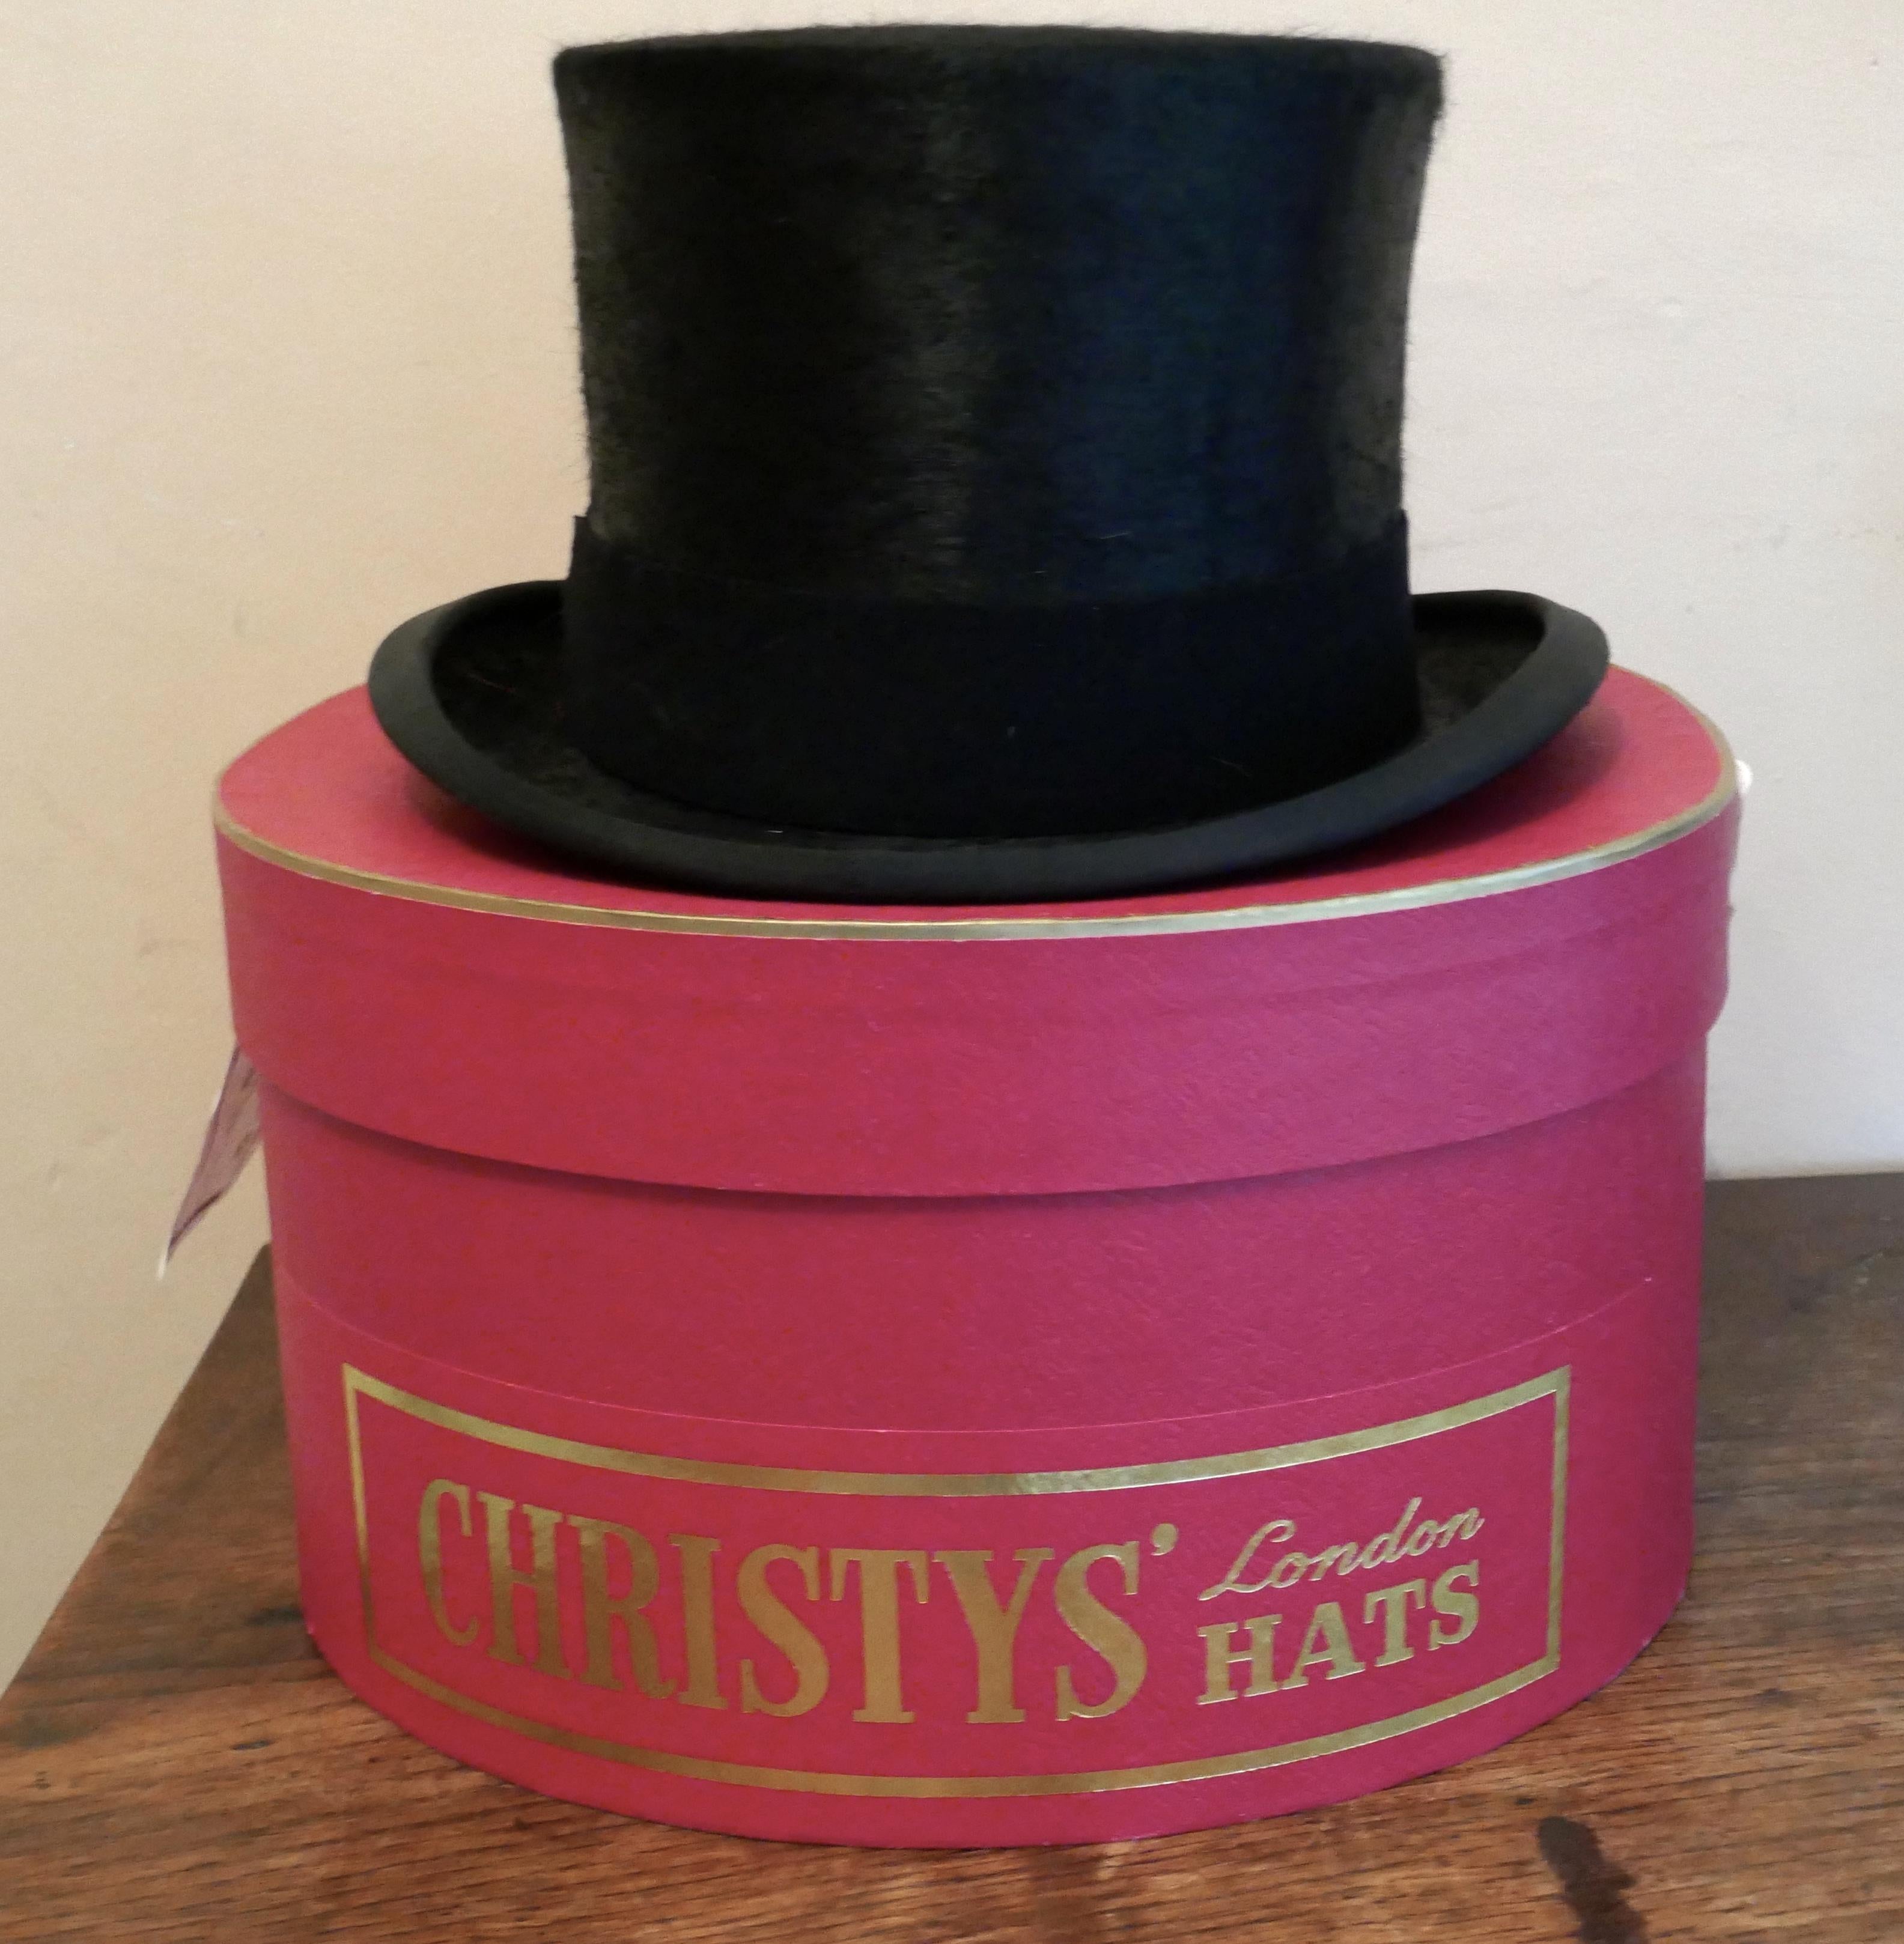 Christy’s Of London Top Hat, Evening Wear,Horse Riding, Dressage or Hunting

A Fine quality Hat, in Original Christy Box, 1” hat band, silk and leather Lined, size 63/4 inches
For Formal Dress, Dressage or Hunting
Worn only once, in good